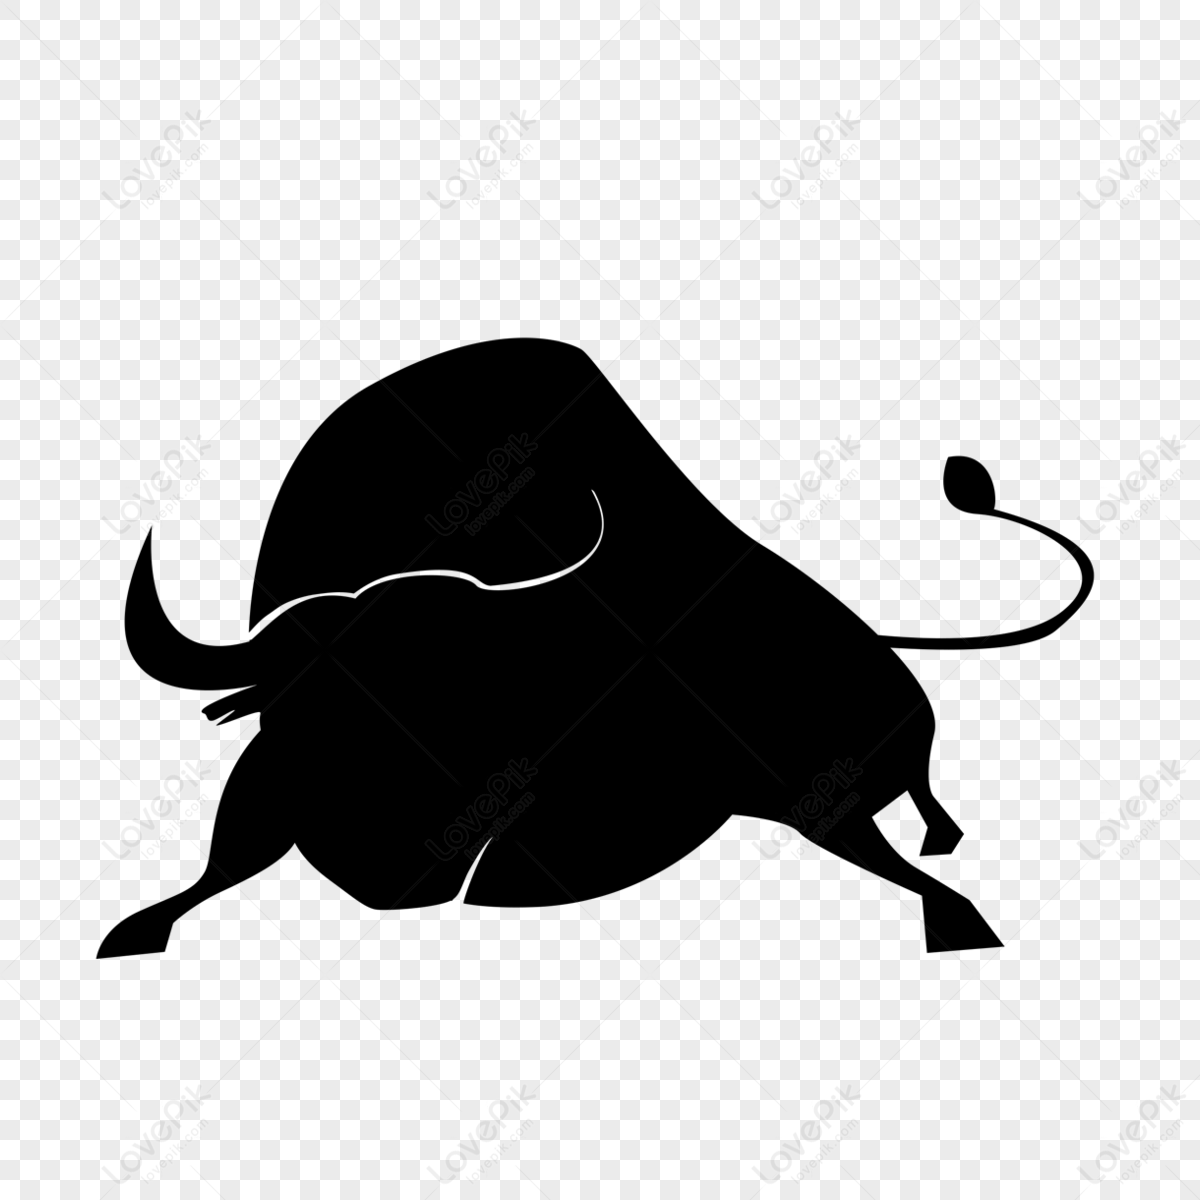 Black Bull Images, HD Pictures For Free Vectors Download - Lovepik.com